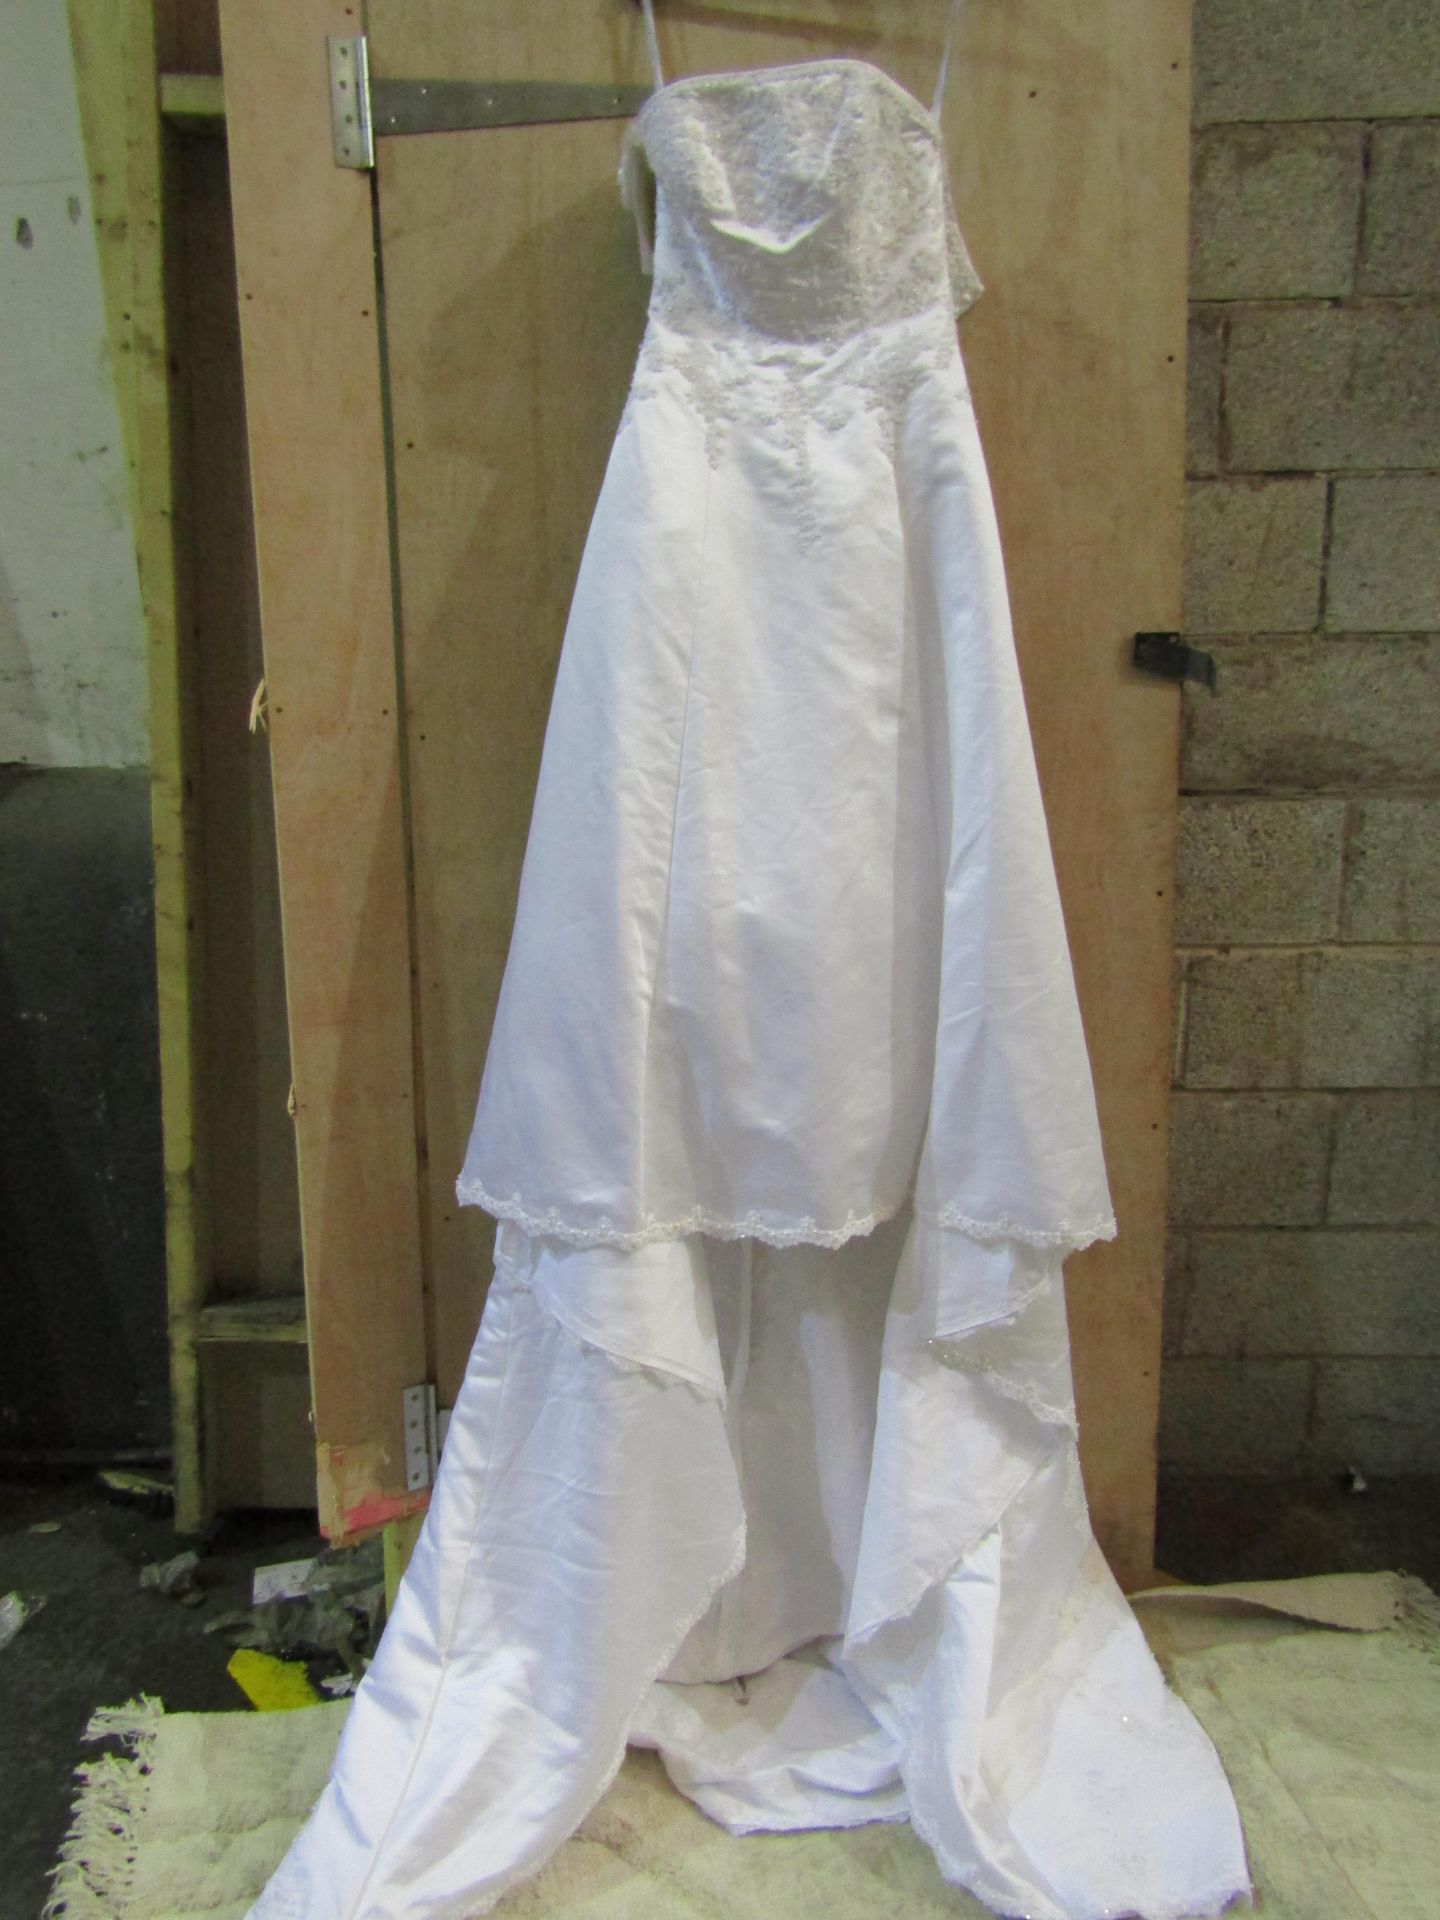 Approx 500 pieces of wedding shop stock to include wedding dresses, mother of the bride, dresses, - Image 94 of 108